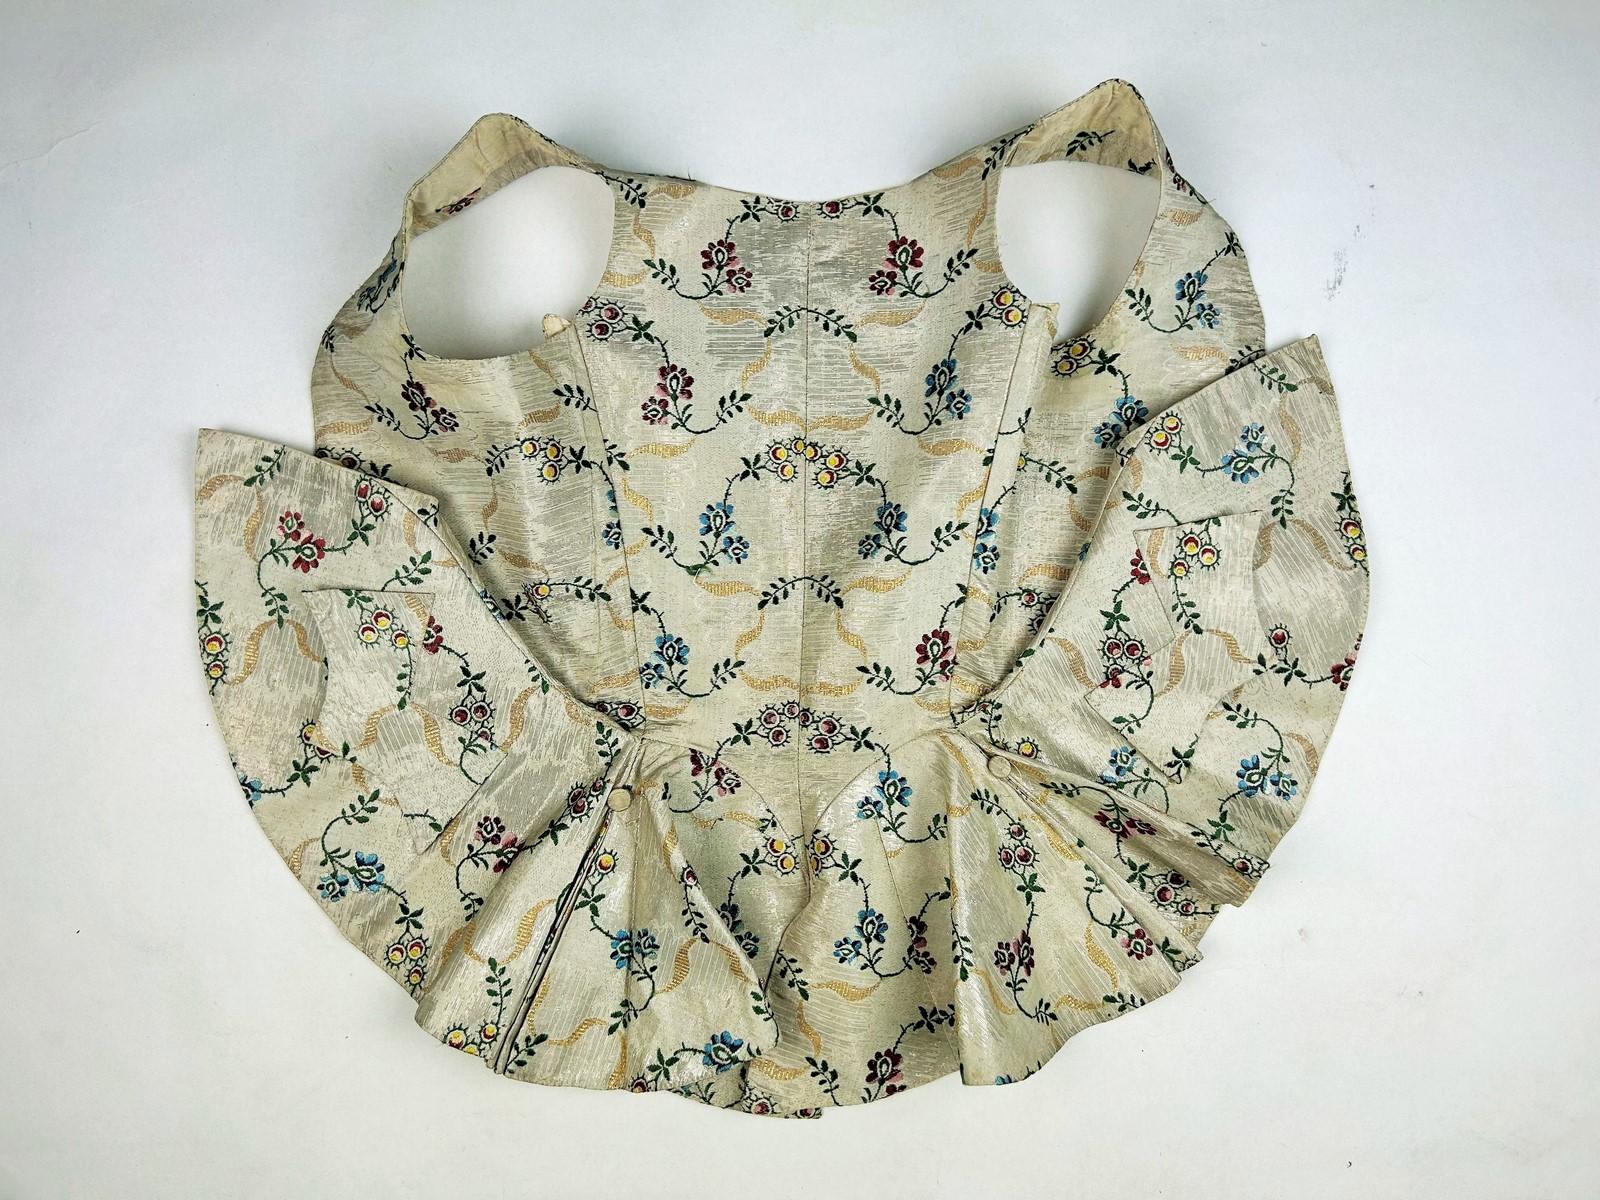 Amazon bodice in silver and gold lamé cloth - England or Europe Circa 1750-1760 For Sale 10